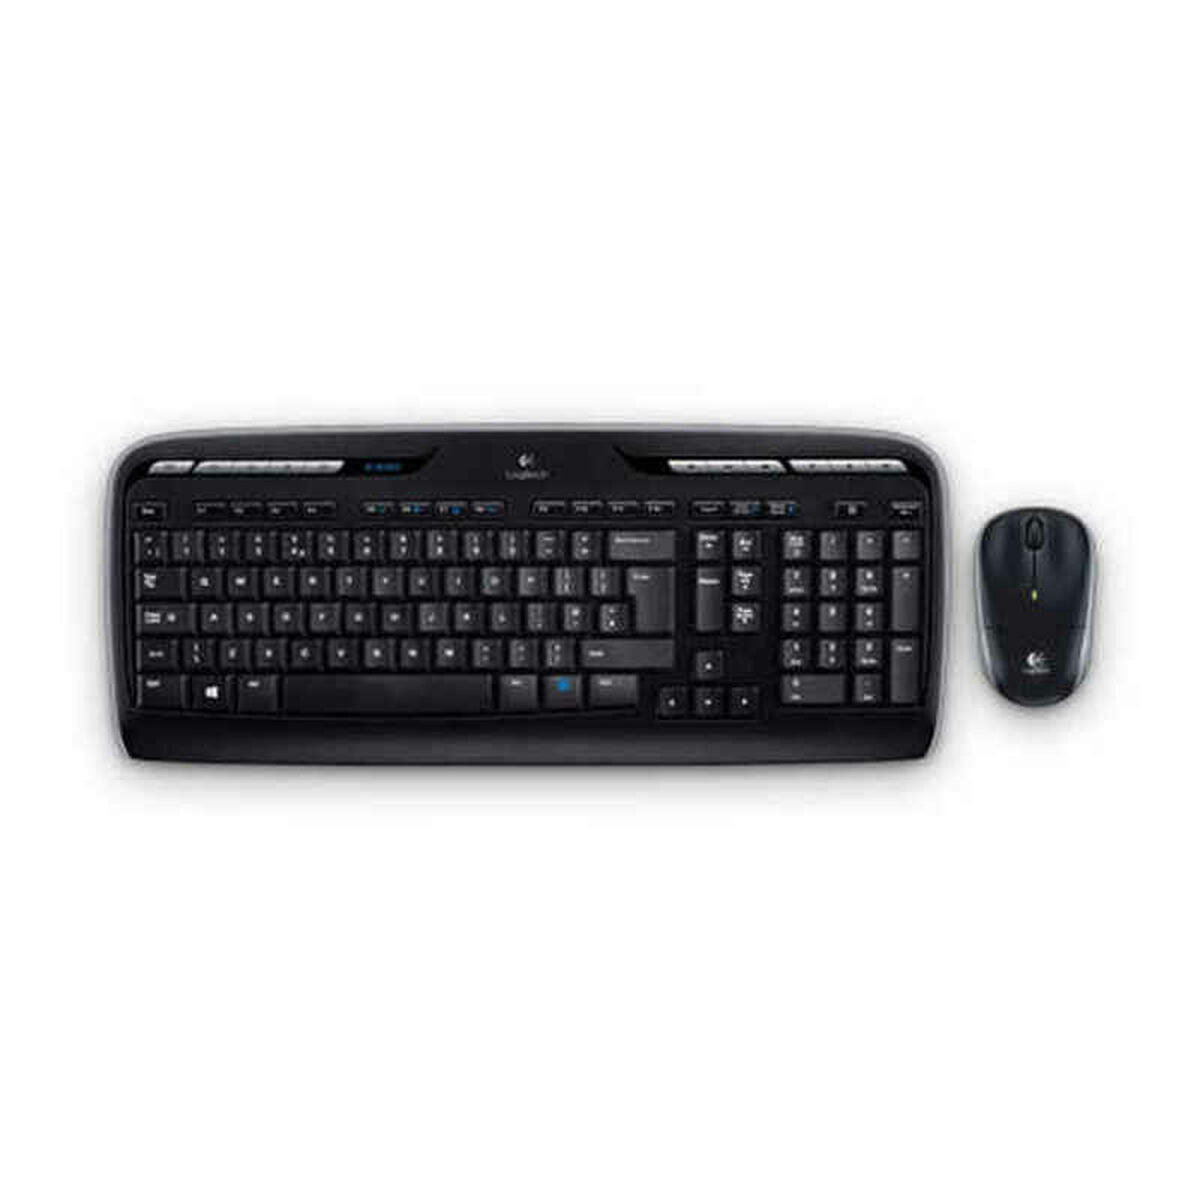 Keyboard and Wireless Mouse Logitech MK330 Black Spanish Qwerty, Logitech, Computing, Accessories, keyboard-and-wireless-mouse-logitech-mk330-black-spanish-qwerty, :QWERTY, :Spanish, Brand_Logitech, category-reference-2609, category-reference-2642, category-reference-2646, category-reference-t-19685, category-reference-t-19908, category-reference-t-21353, computers / peripherals, Condition_NEW, office, Price_50 - 100, Teleworking, RiotNook